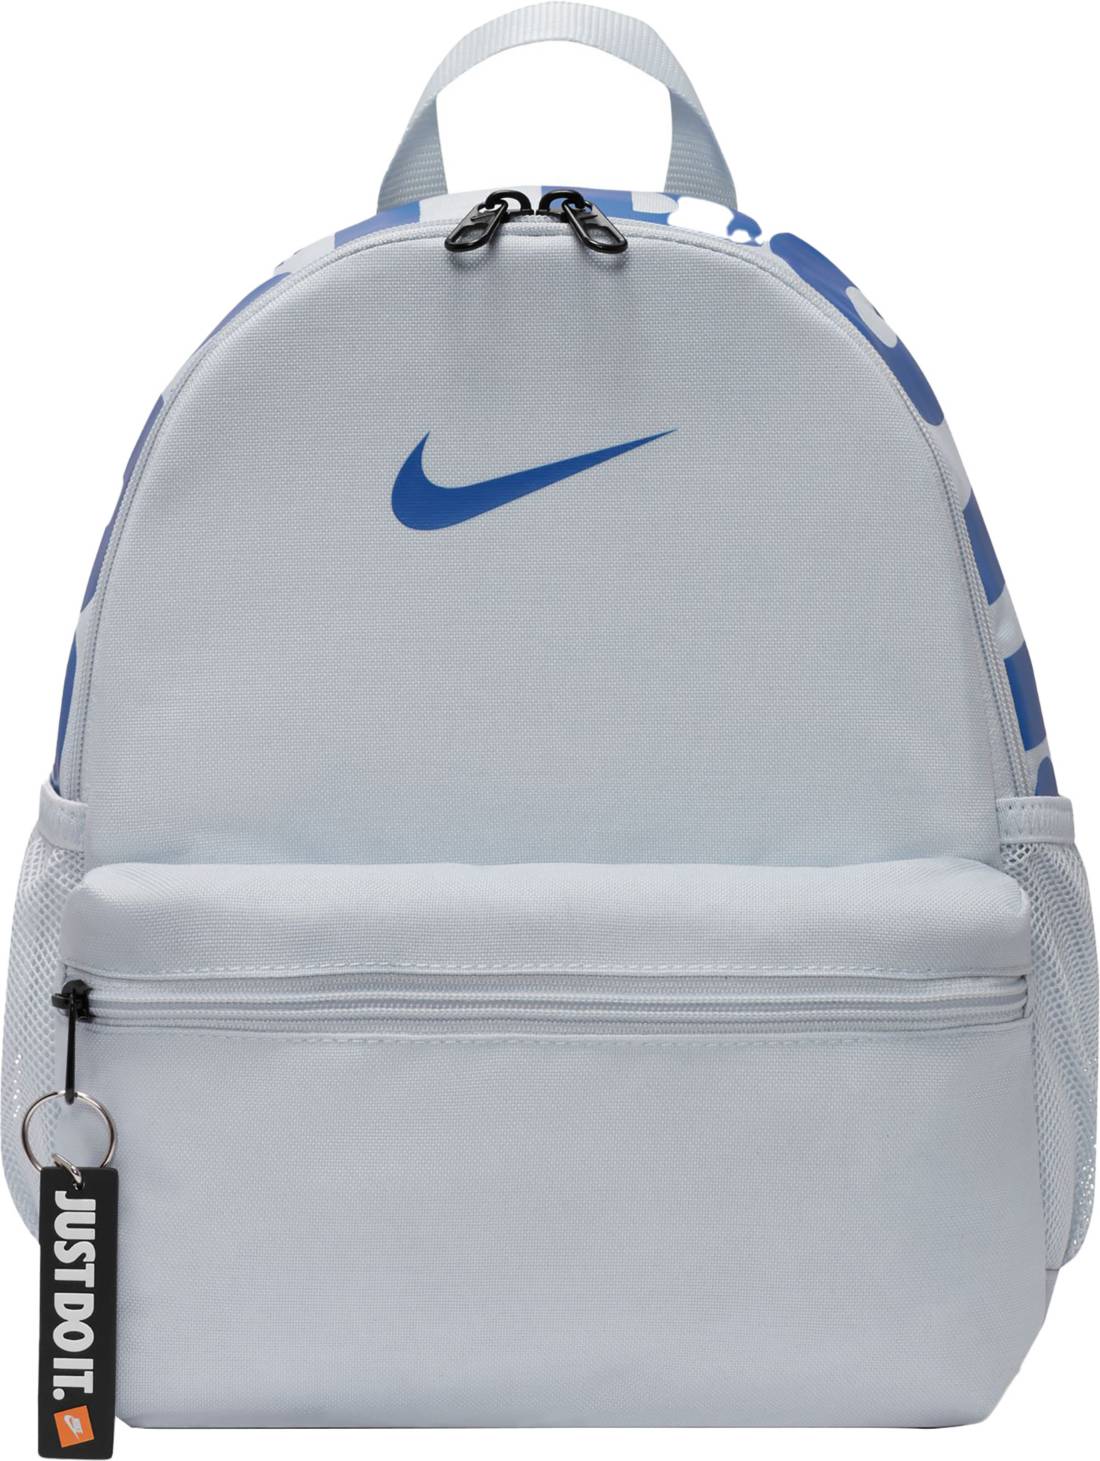 94 cool backpacks for kids - Today's Parent